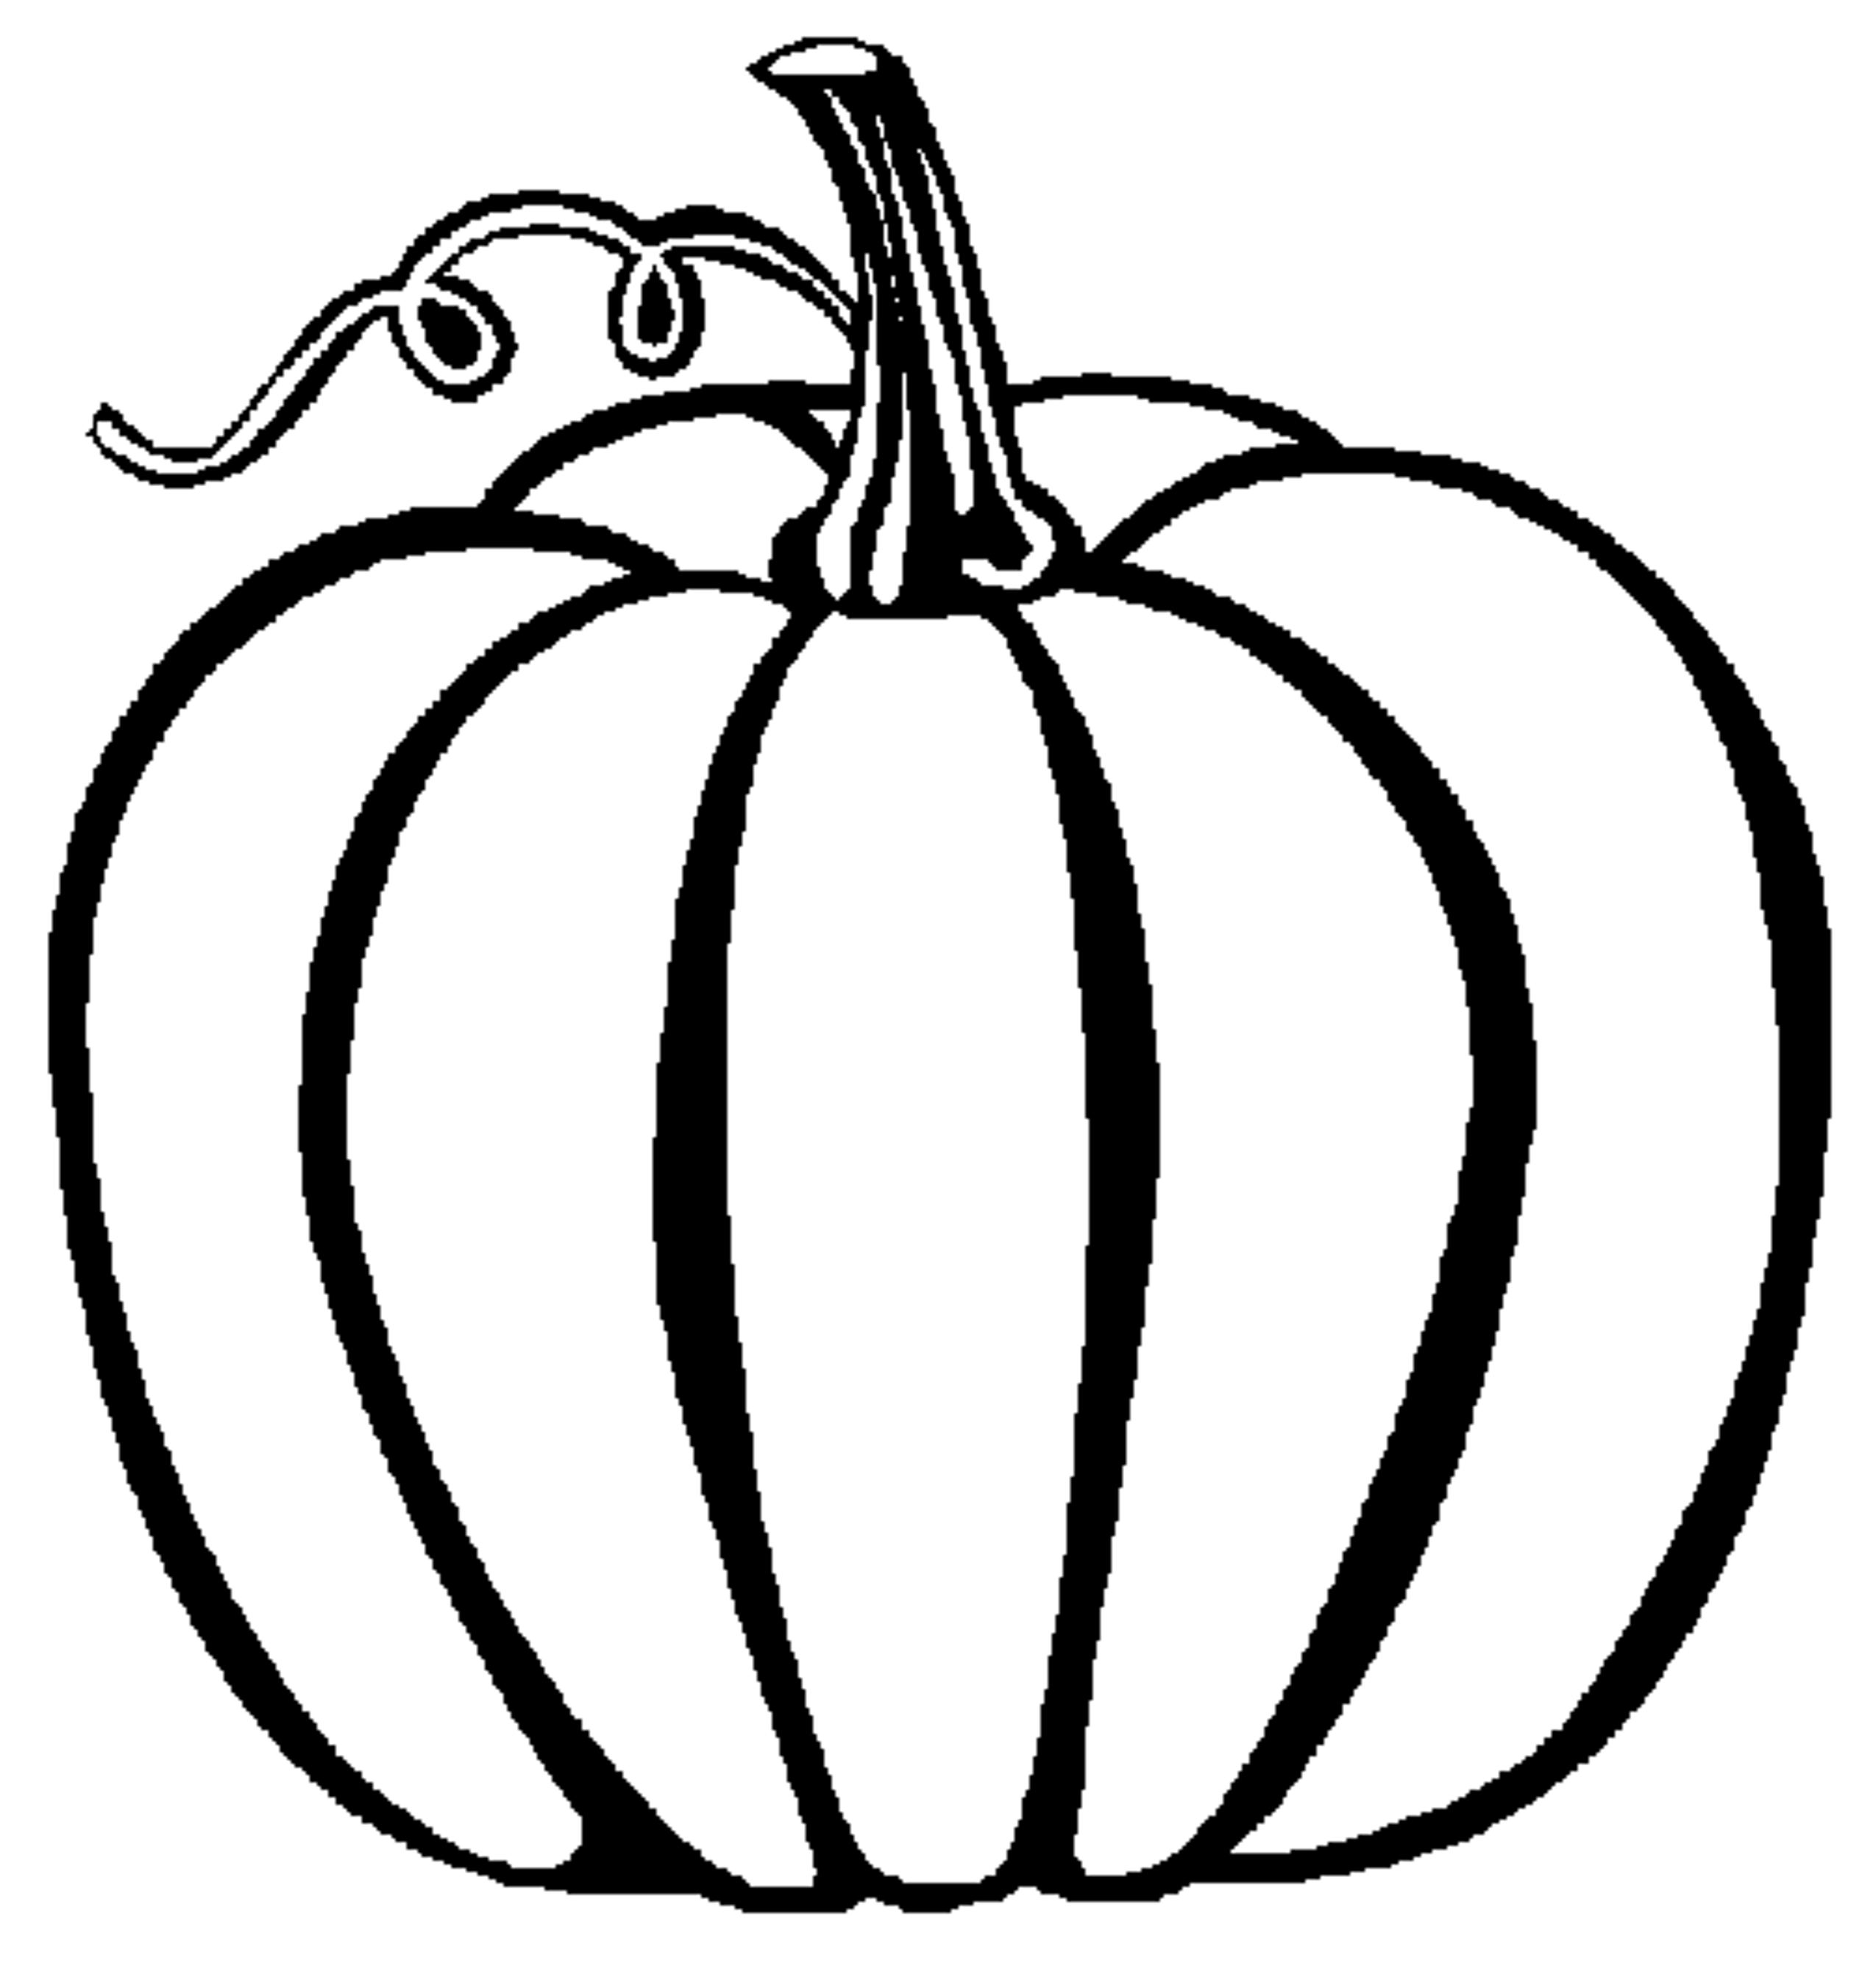 Pumpkin Image Black And White Free download on ClipArtMag